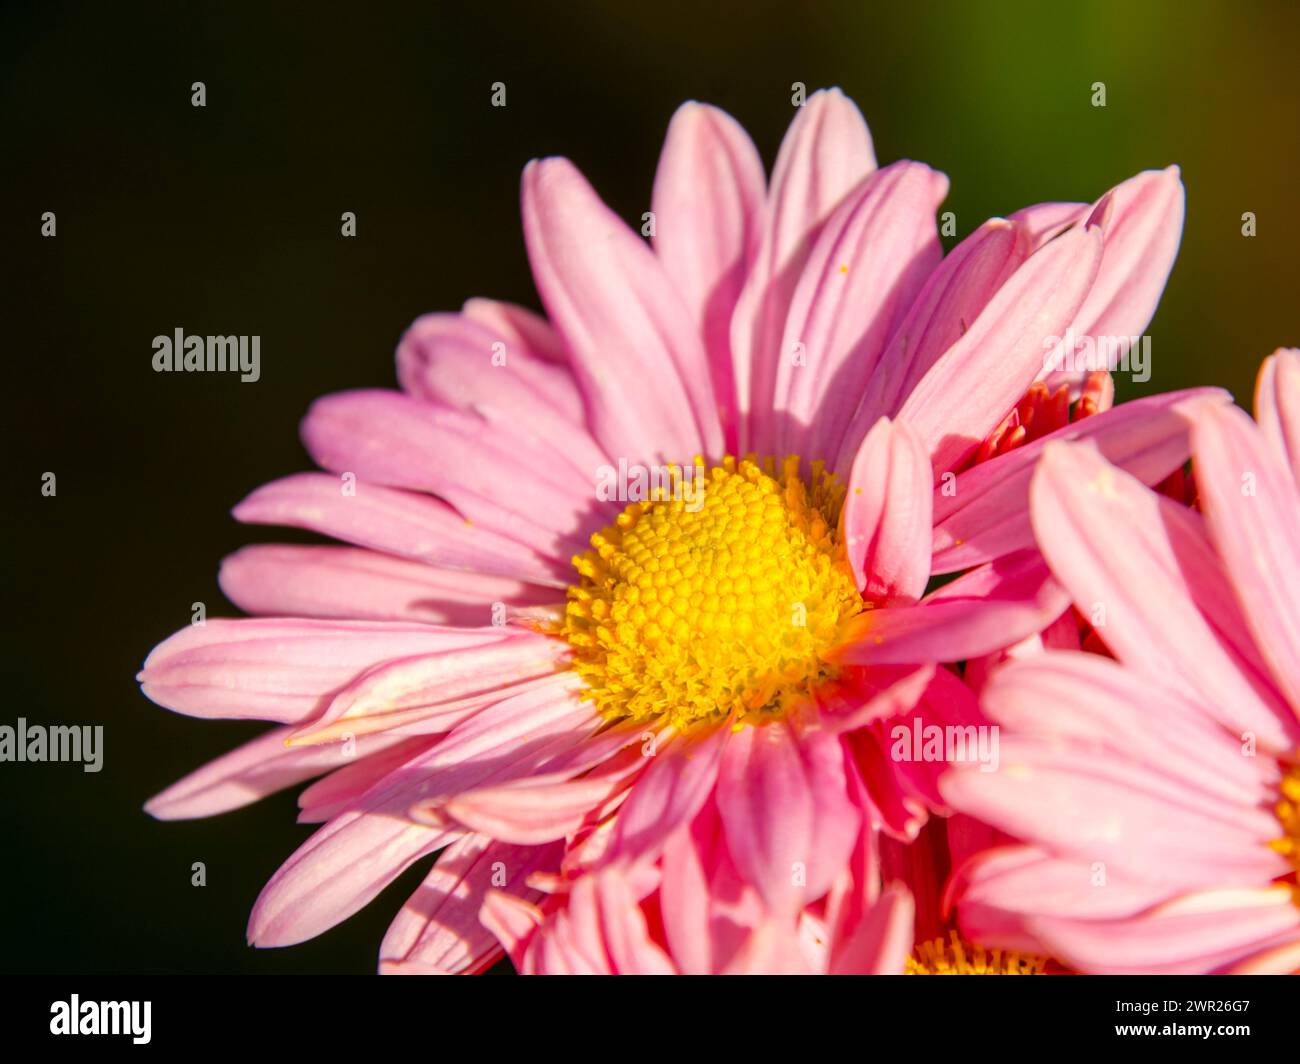 Painted daisy or pyrethrum, its scientific name is Tanacetum coccineum Stock Photo